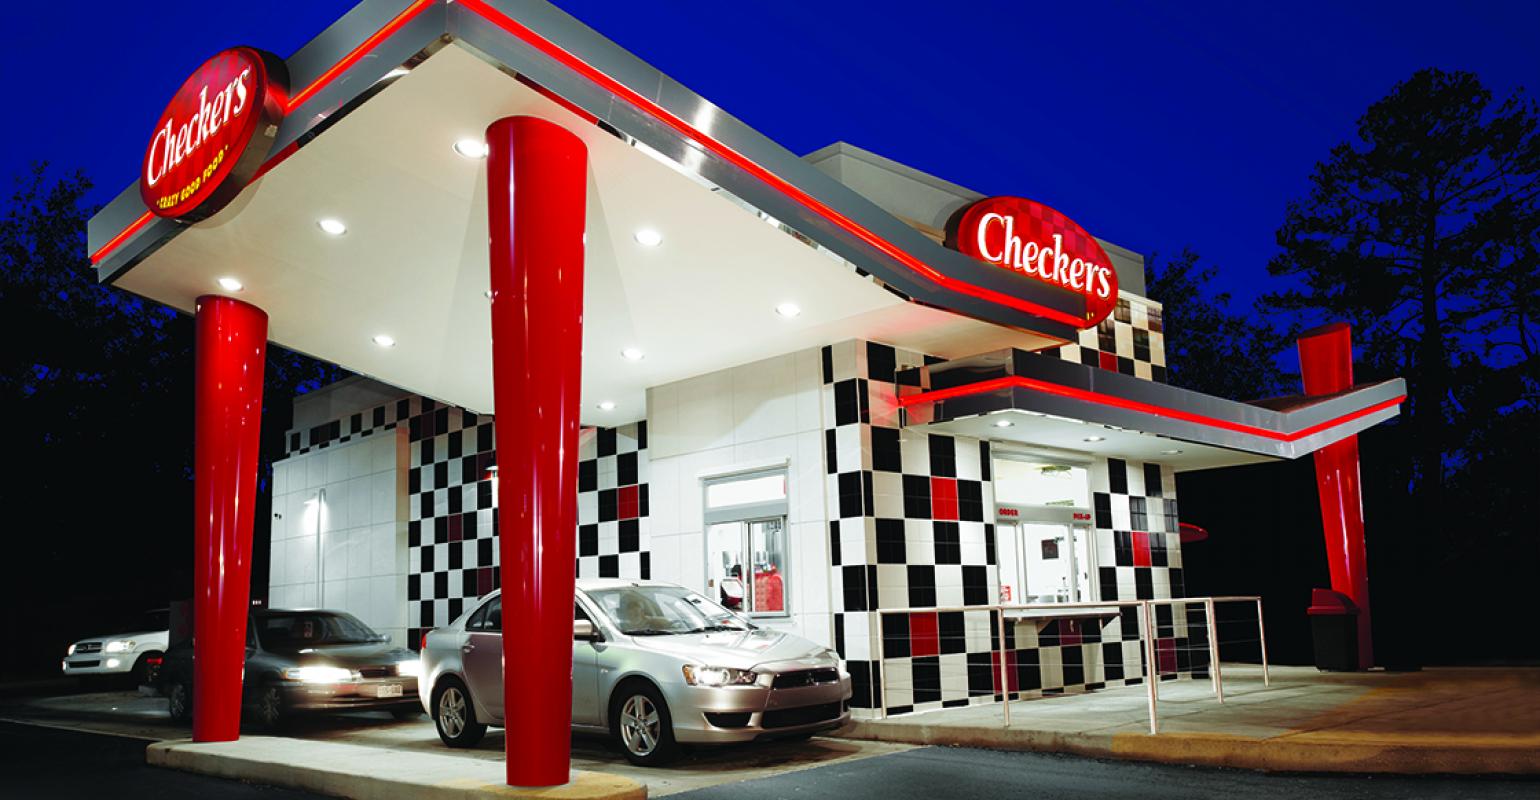 Checkers Drive-In Restaurants Inc